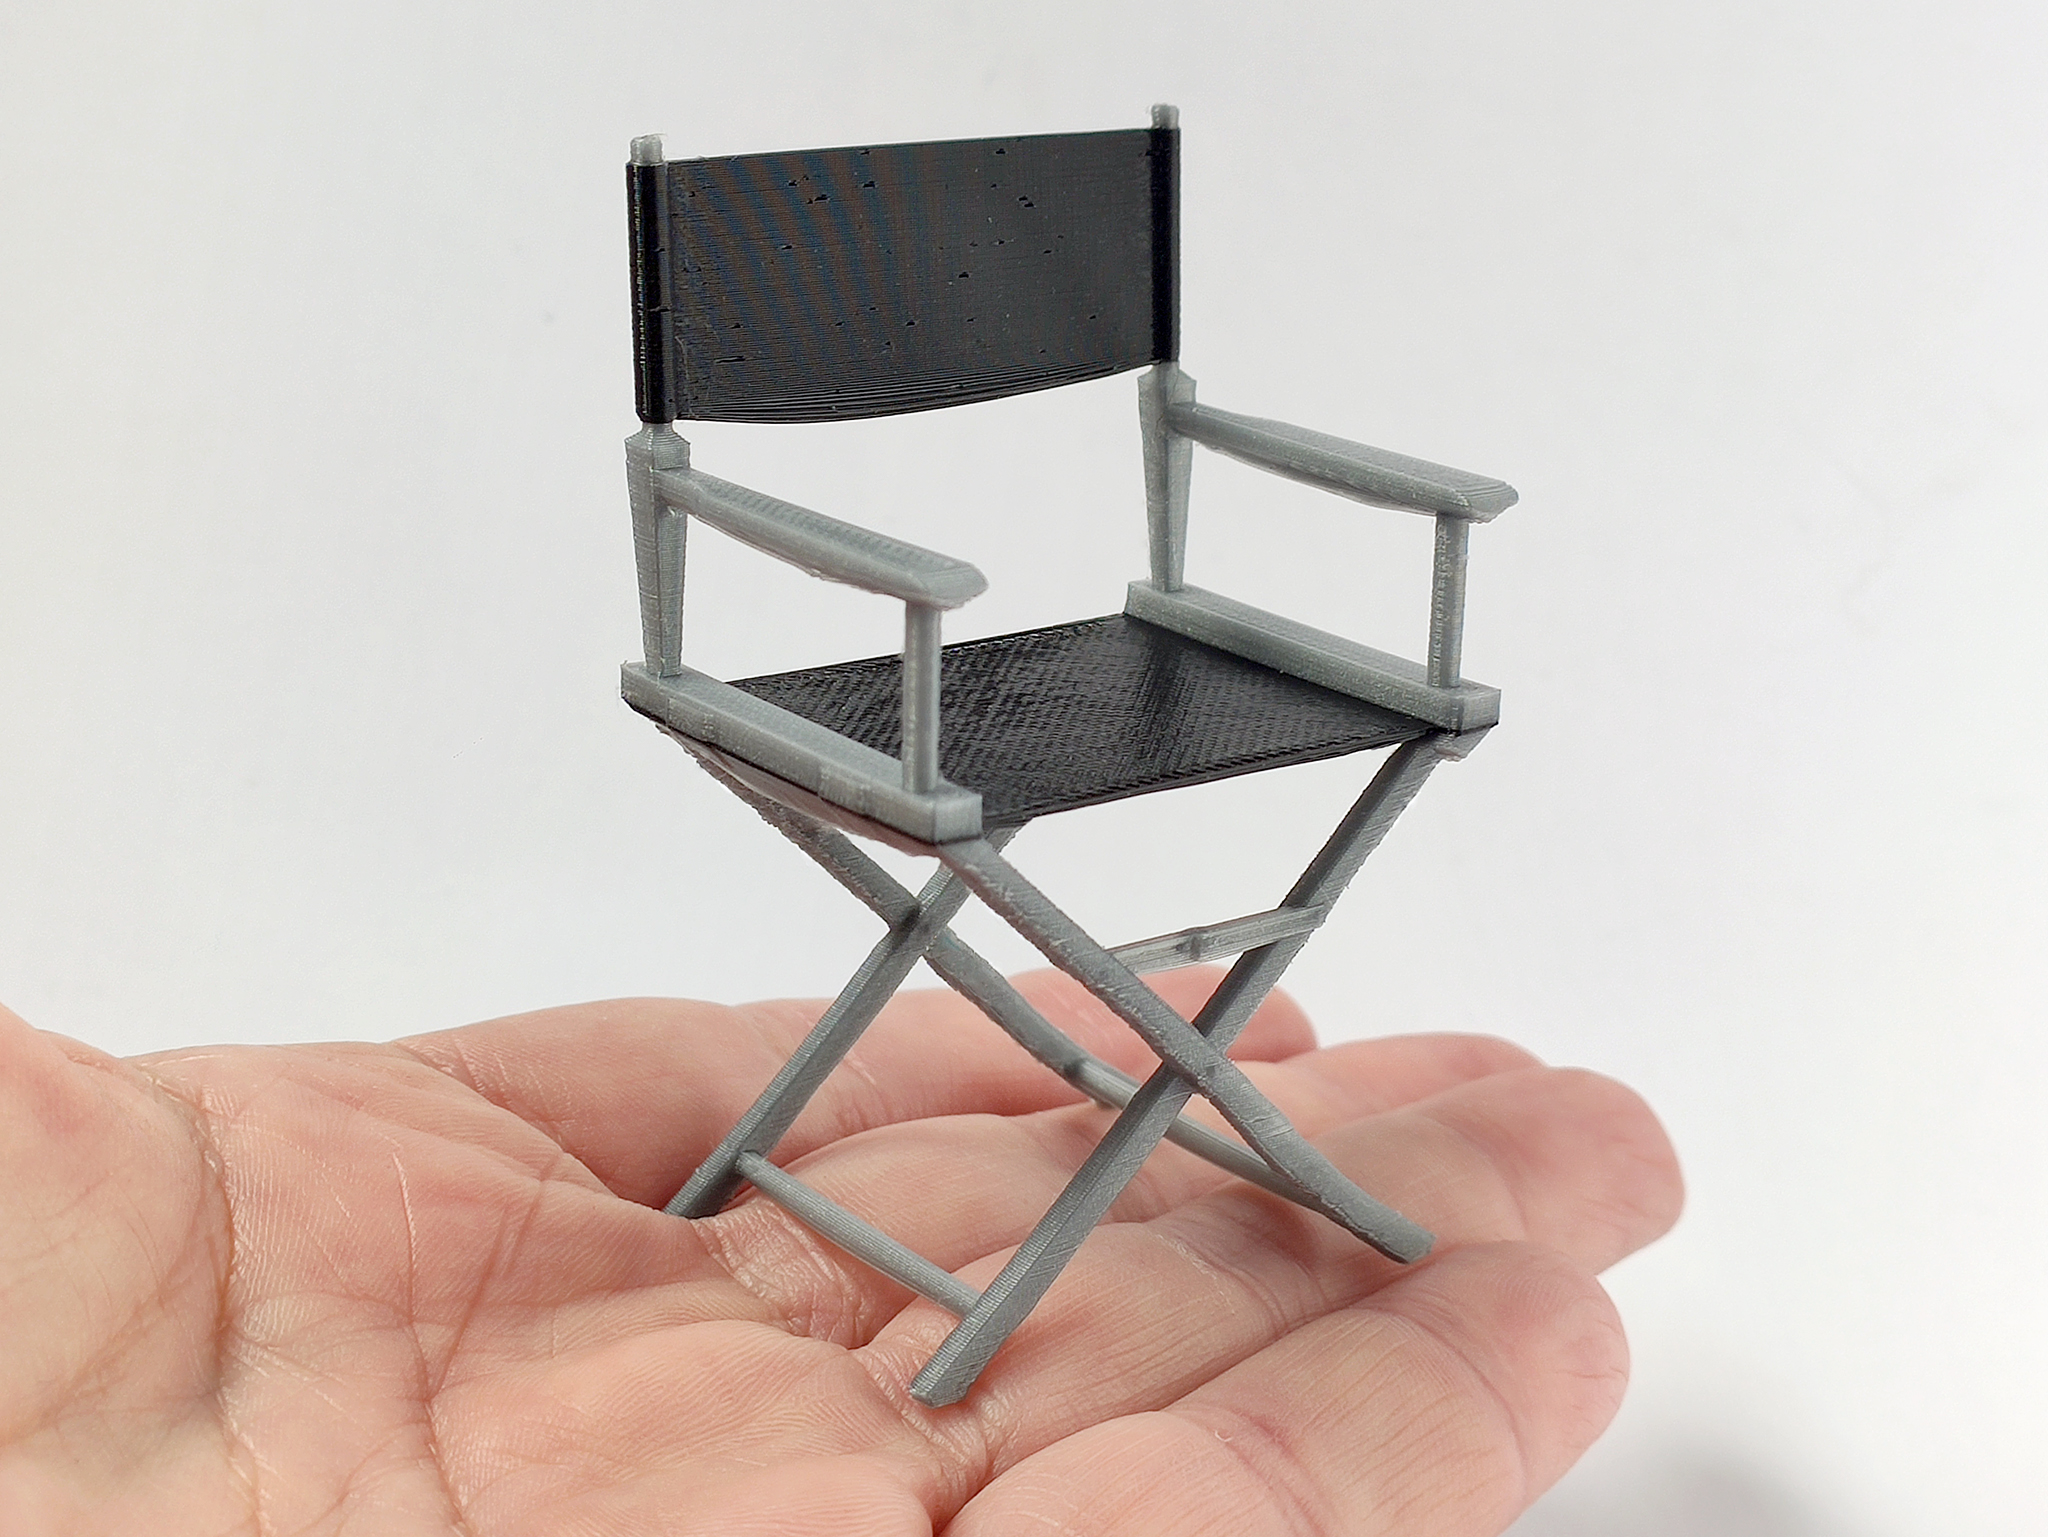 Miniature Director's Chair by Voxel